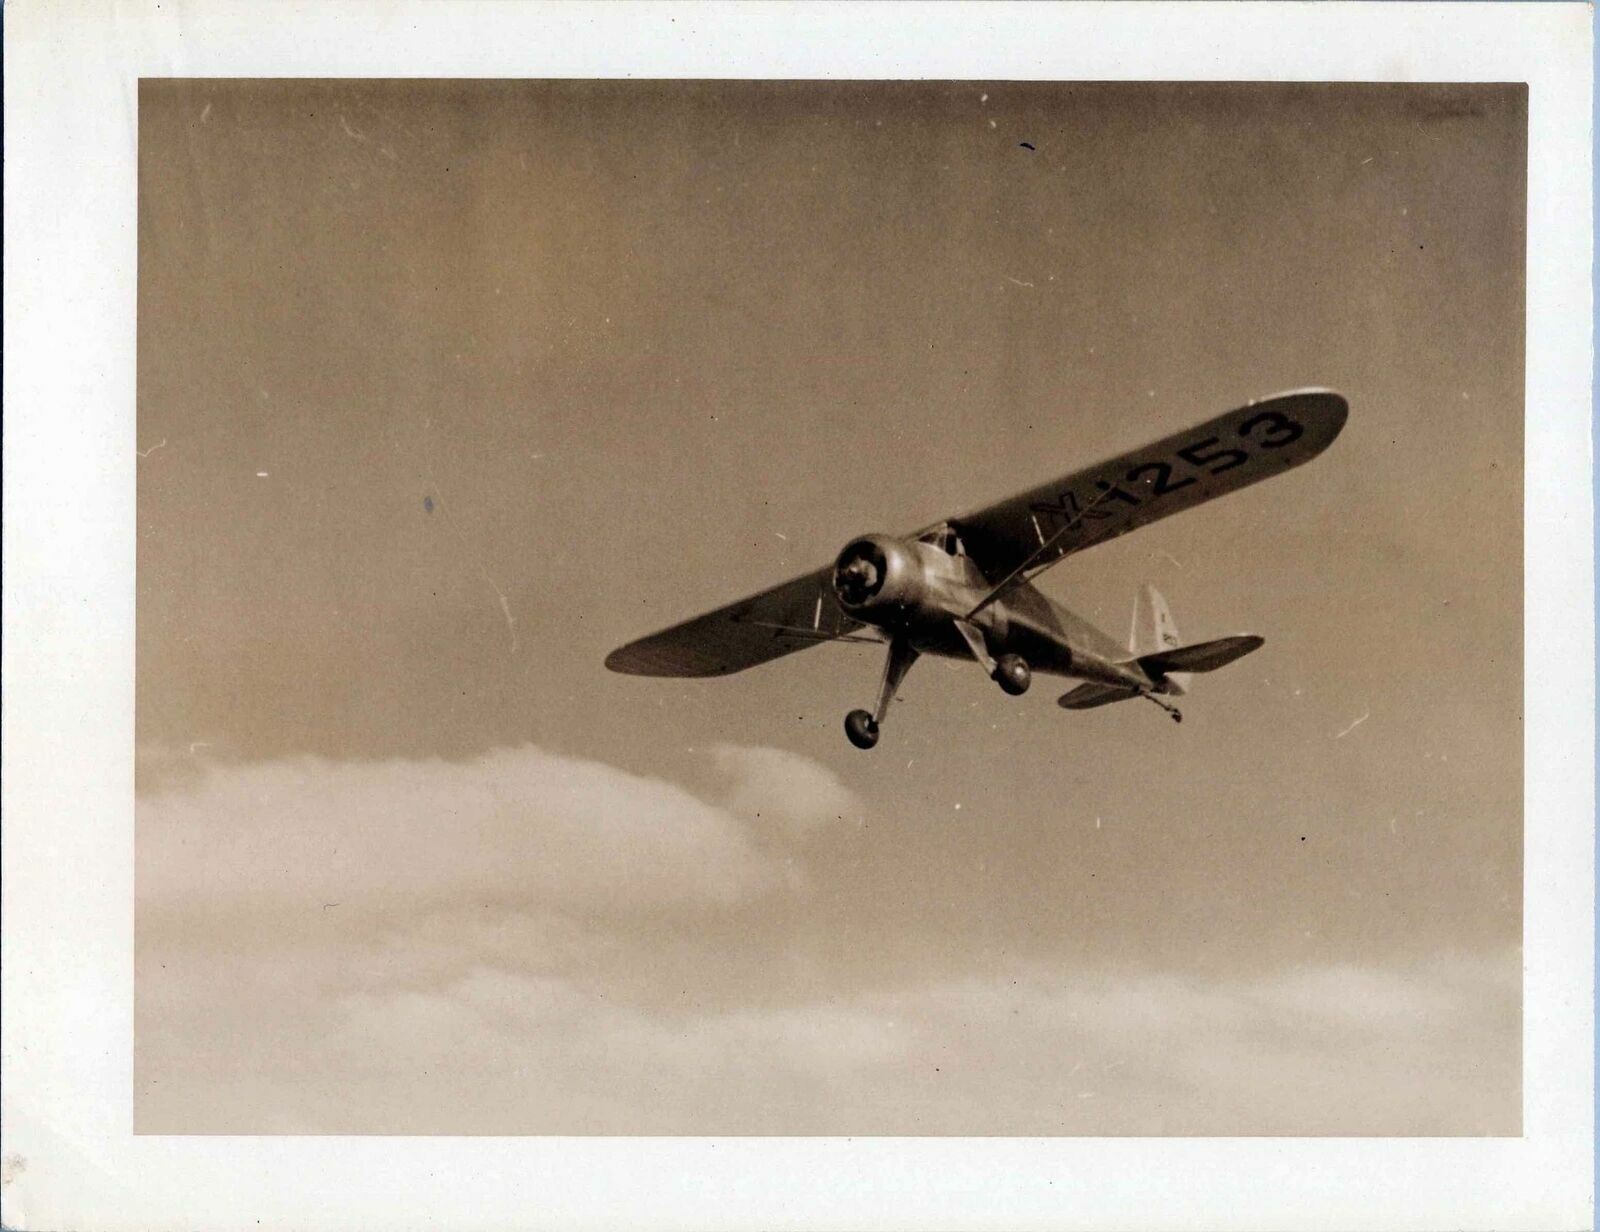 LUSCOMBE 90 AIRCRAFT X1253 INFLIGHT VINTAGE PHOTO